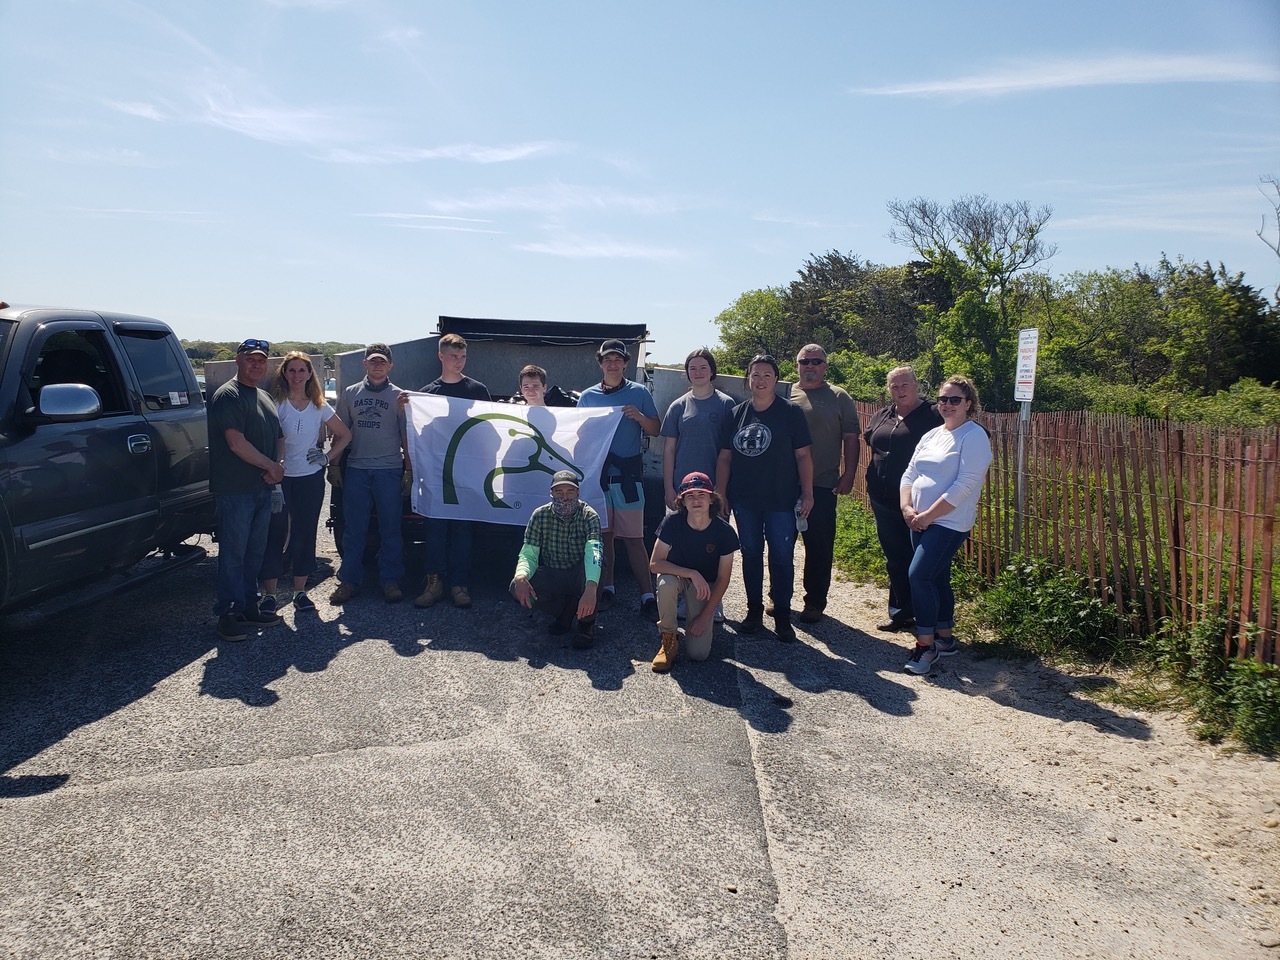 Southampton Town and the Eastern Suffolk chapter of the wetlands conservation organization Ducks Unlimited teamed up for a beach clean-up at Sebonack Inlet and Cold Spring over the weekend.